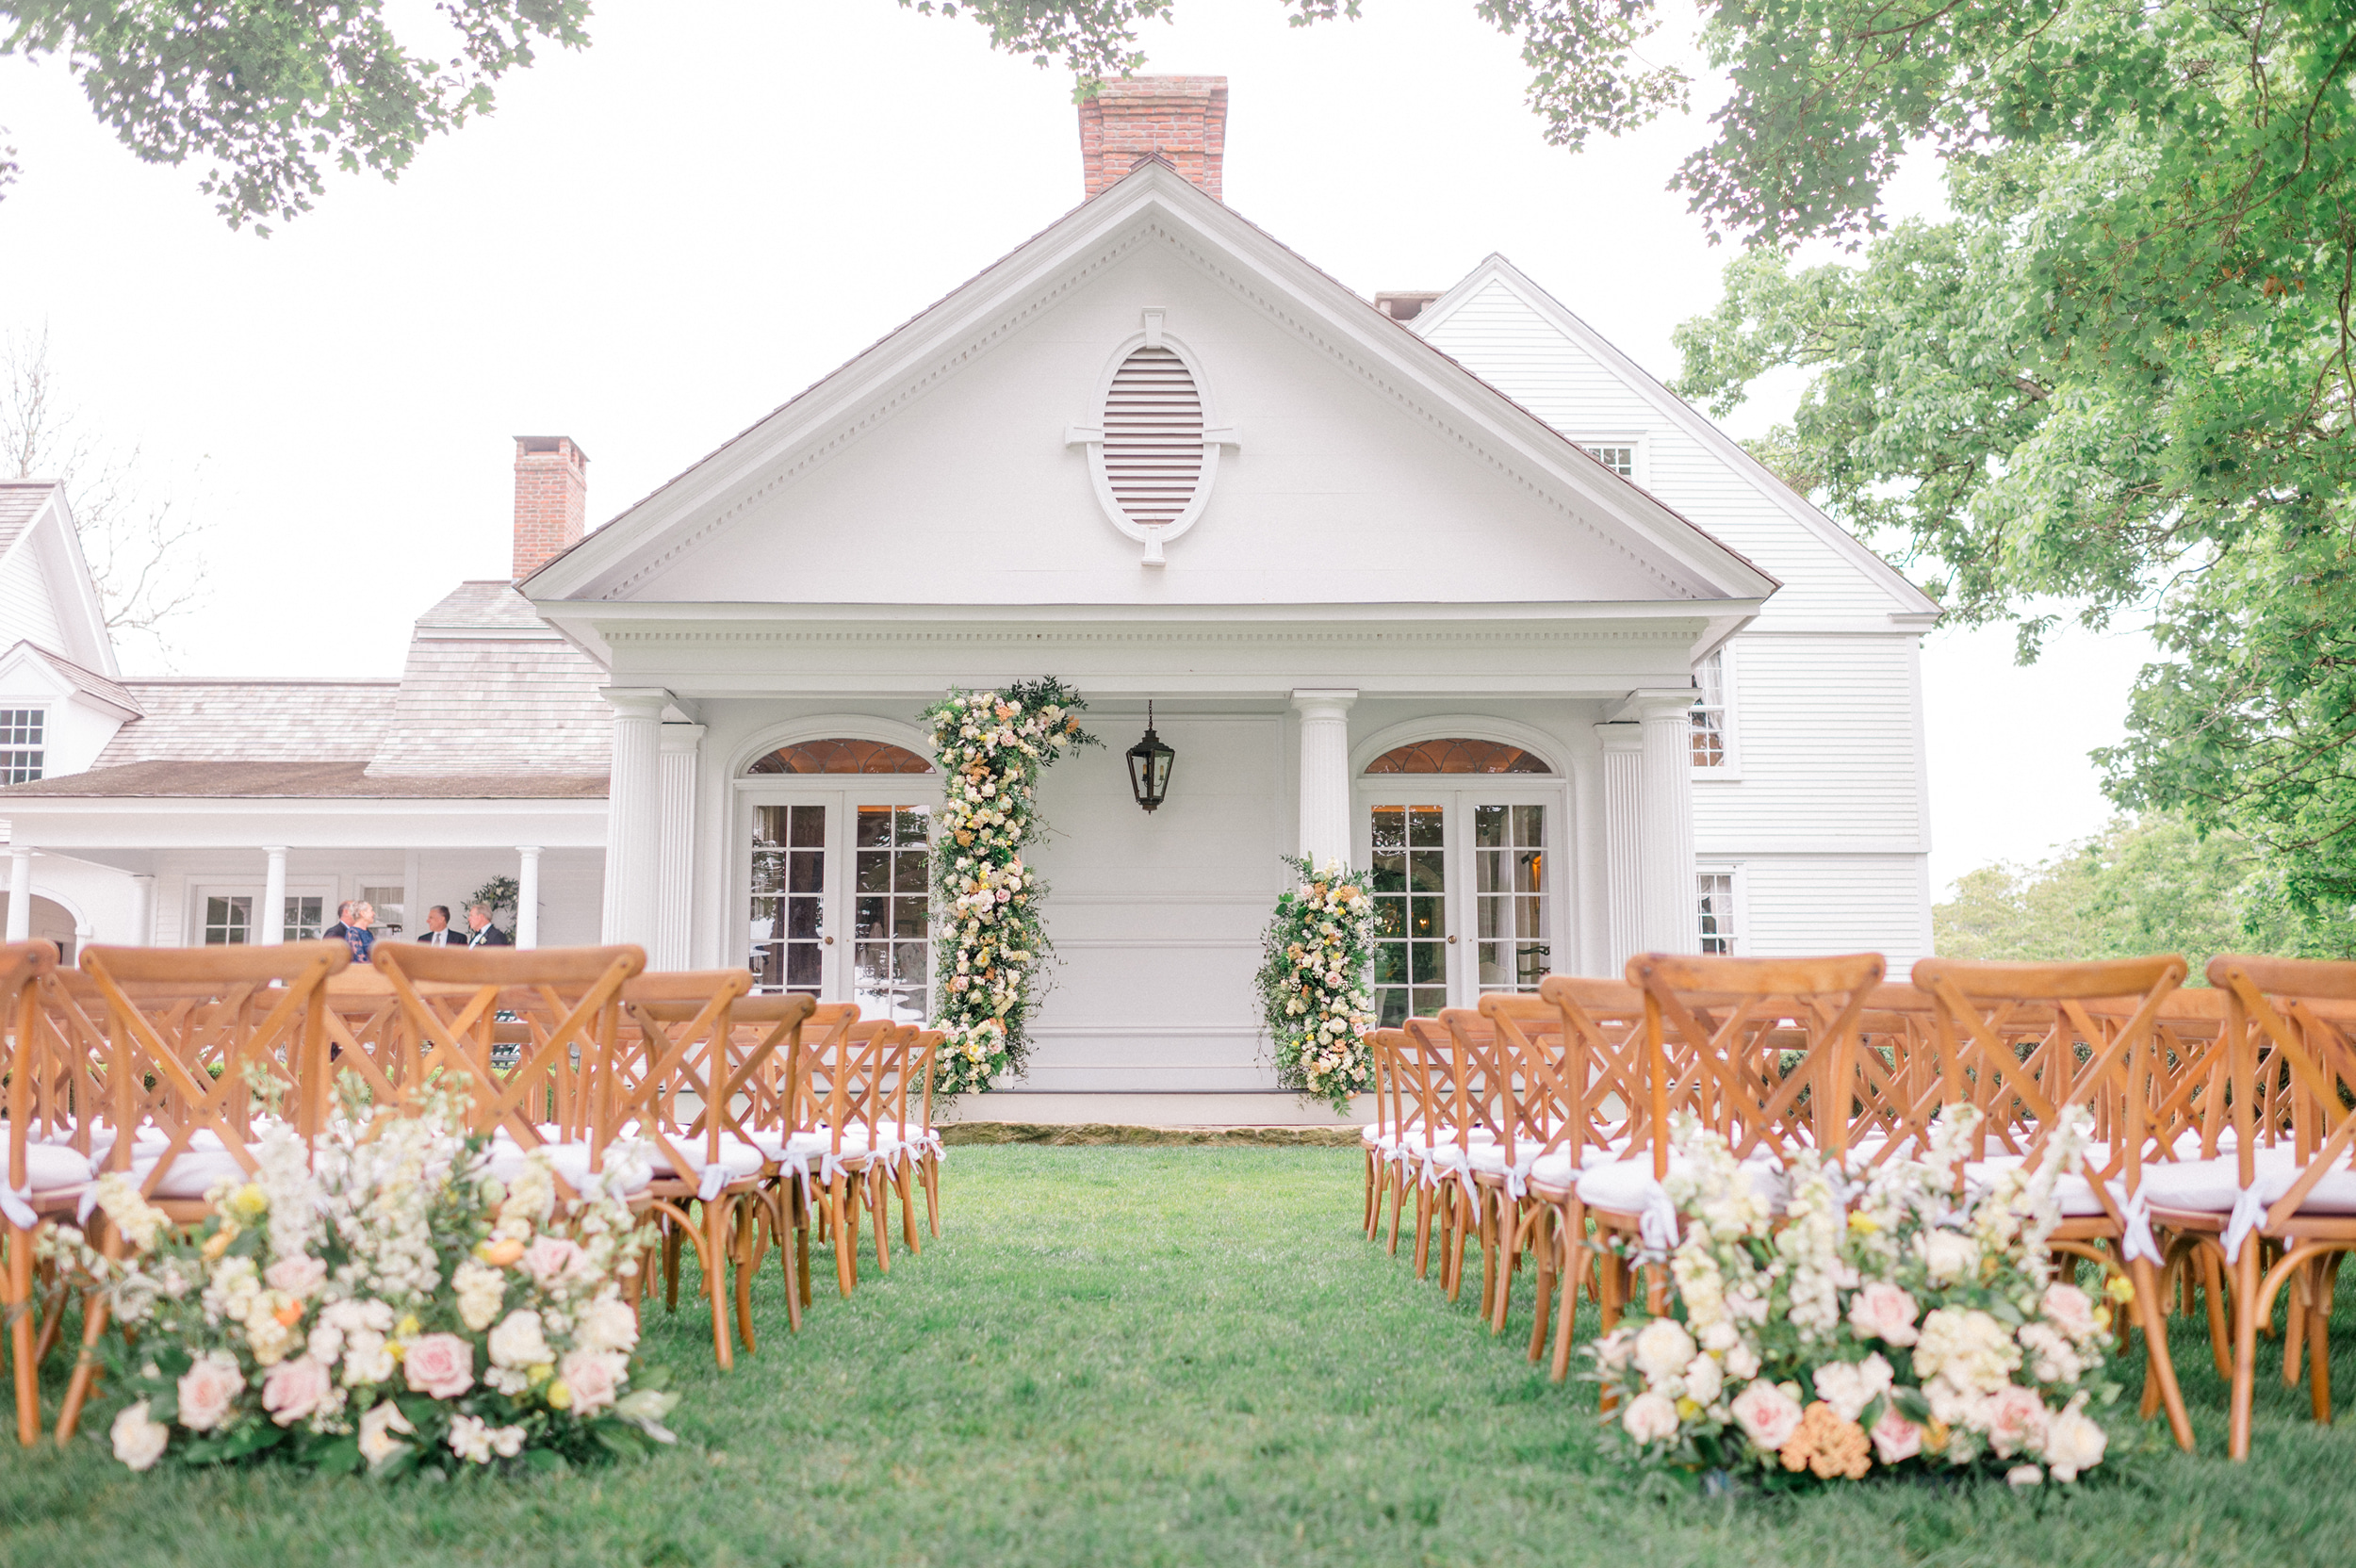 One of the many ceremony location at Smith Farm Gardens featuring columns, climbing floral, and wooden chair for guests